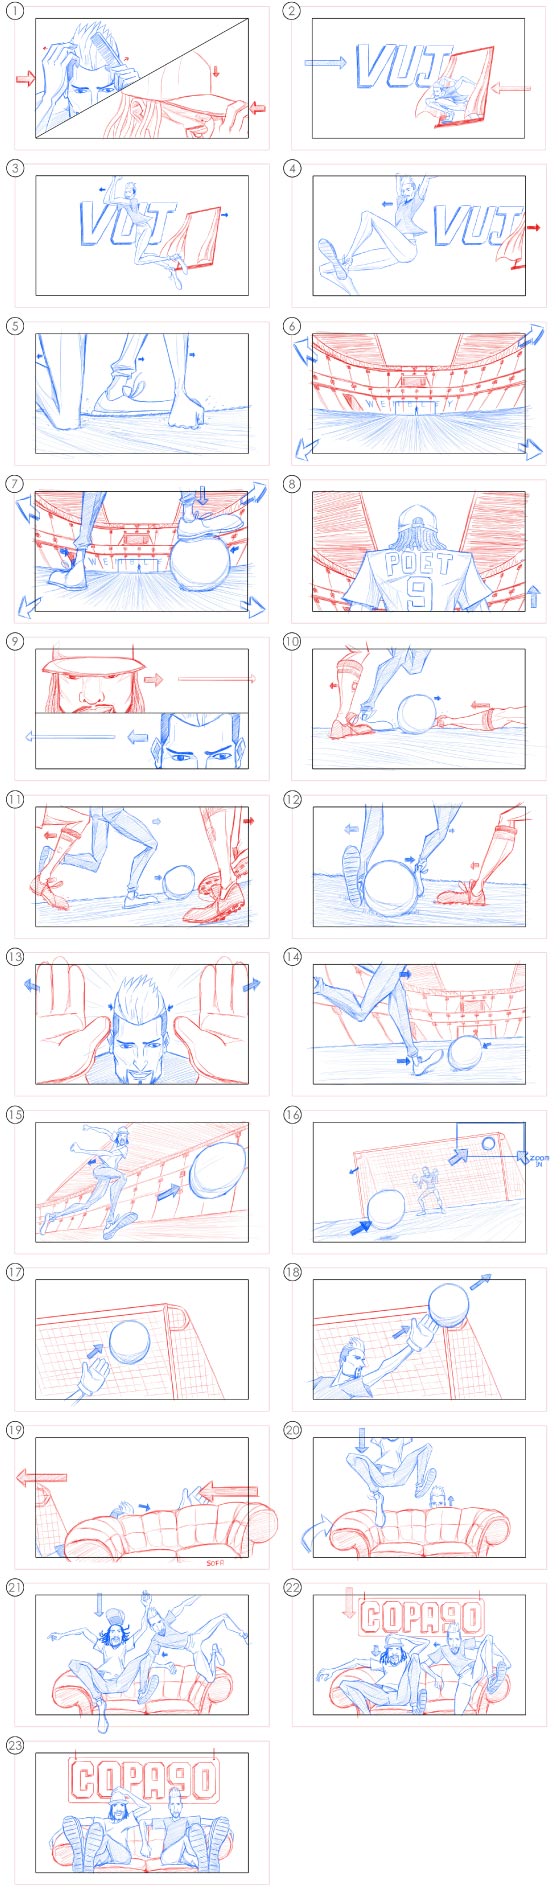 Comments-Below-Storyboard